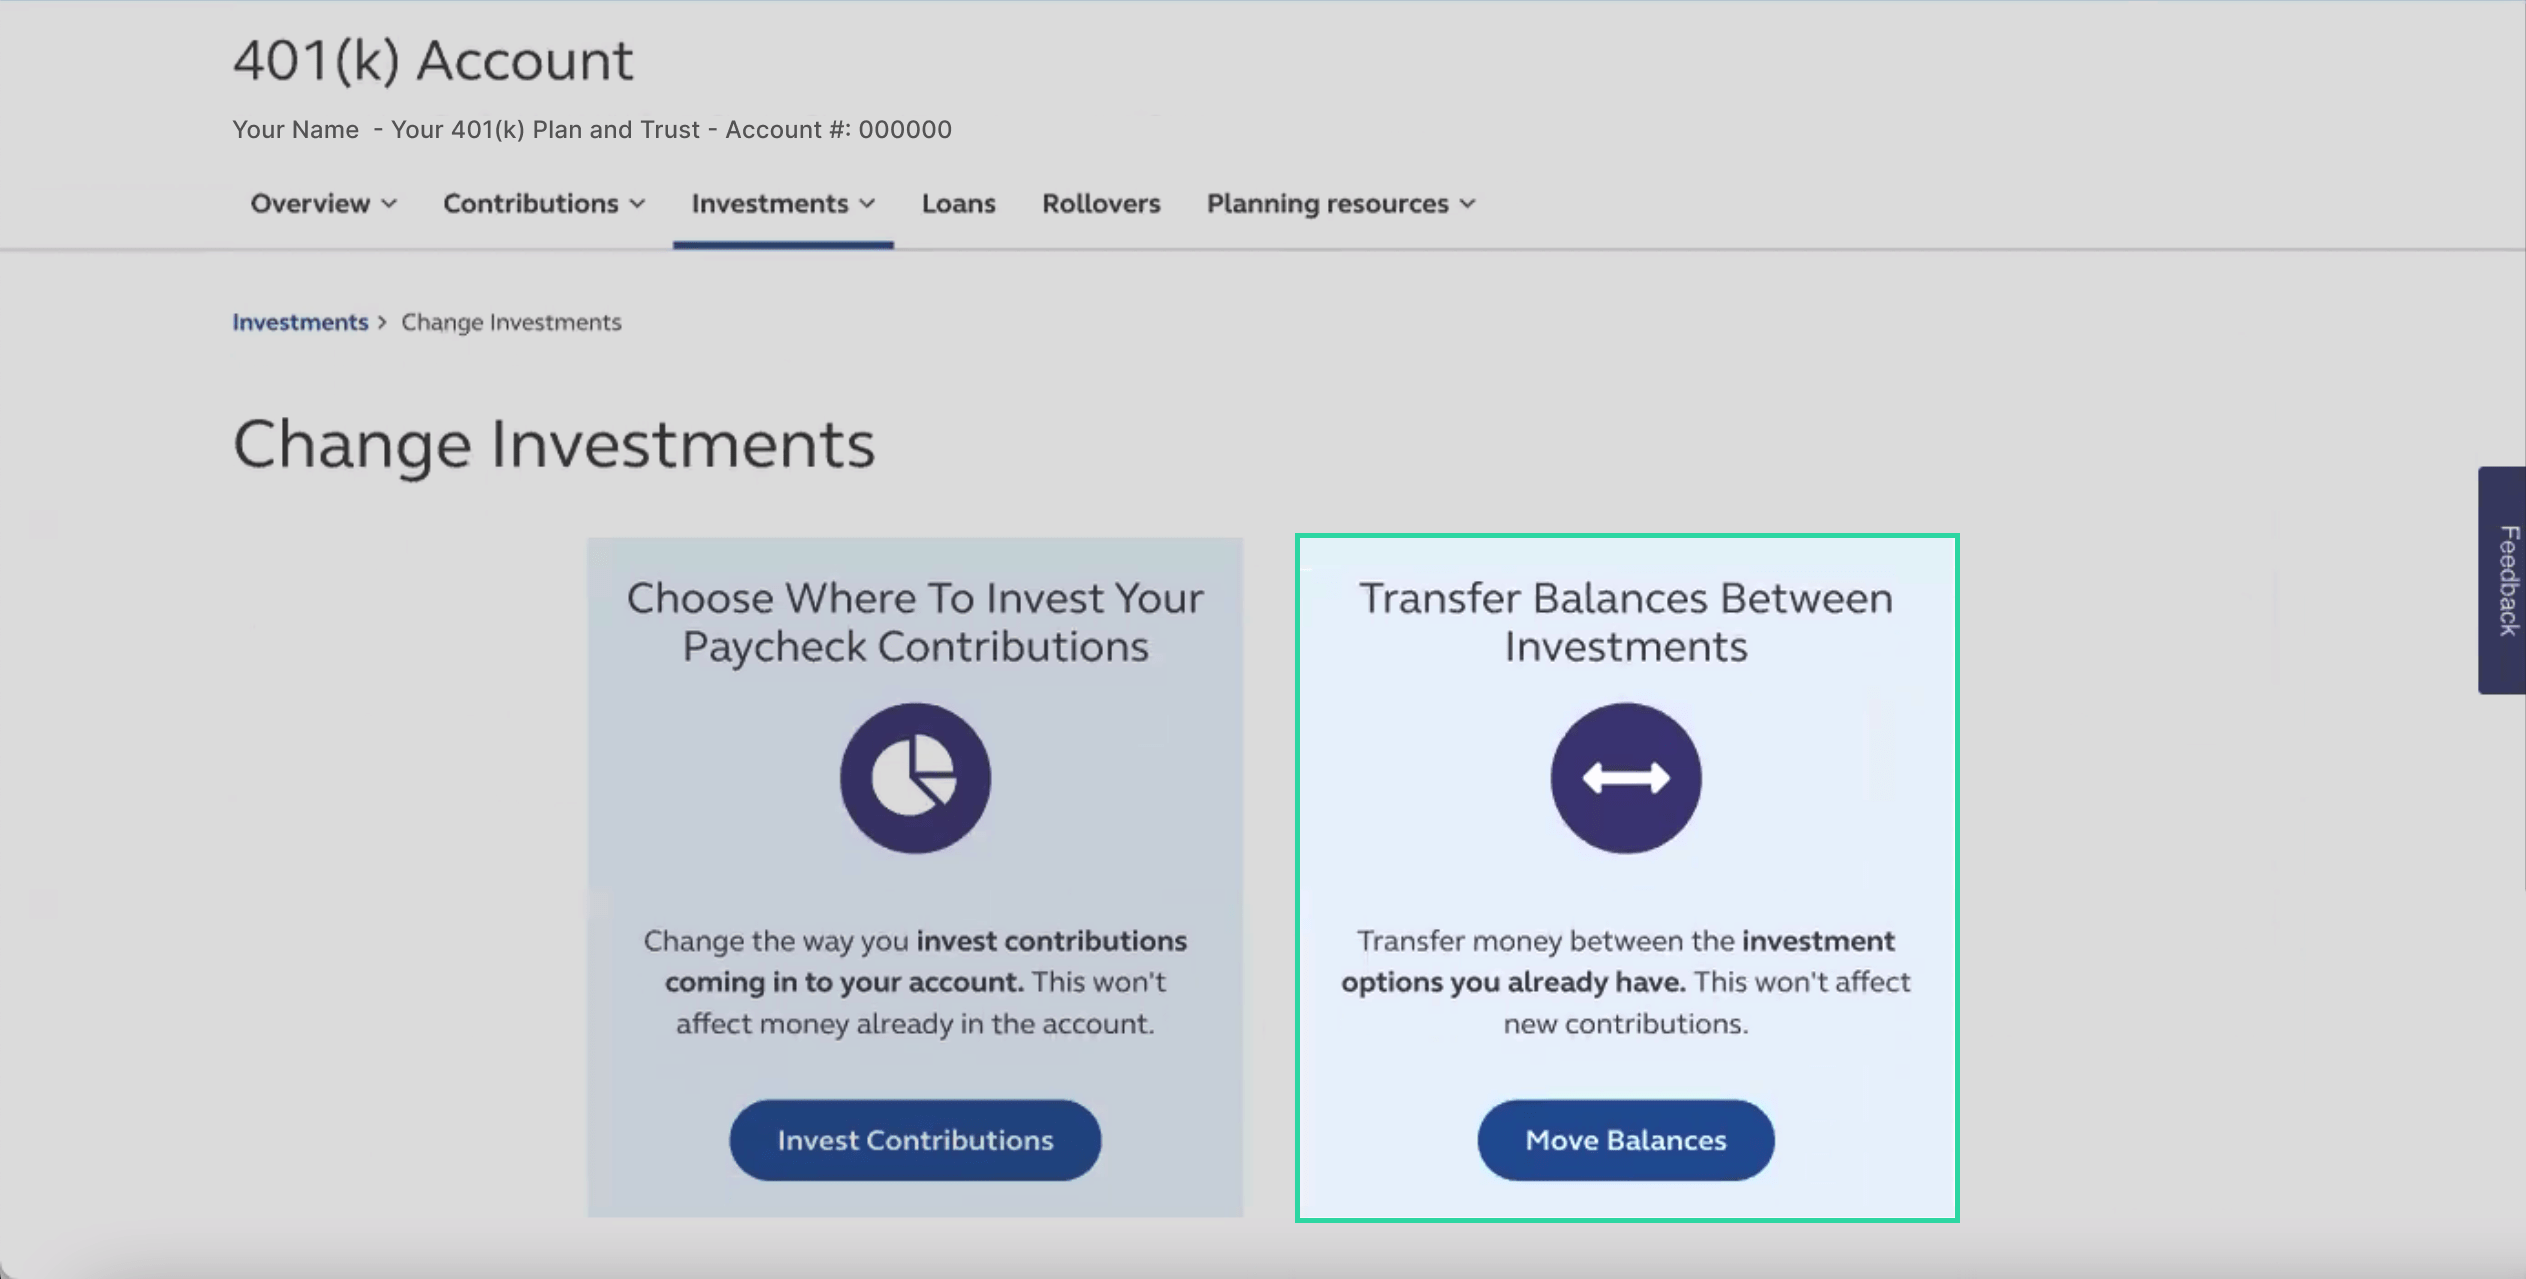 Navigate back to the “Change Investments” page, and select “Move Balances” in the “Transfer Balances Between Investments” section.